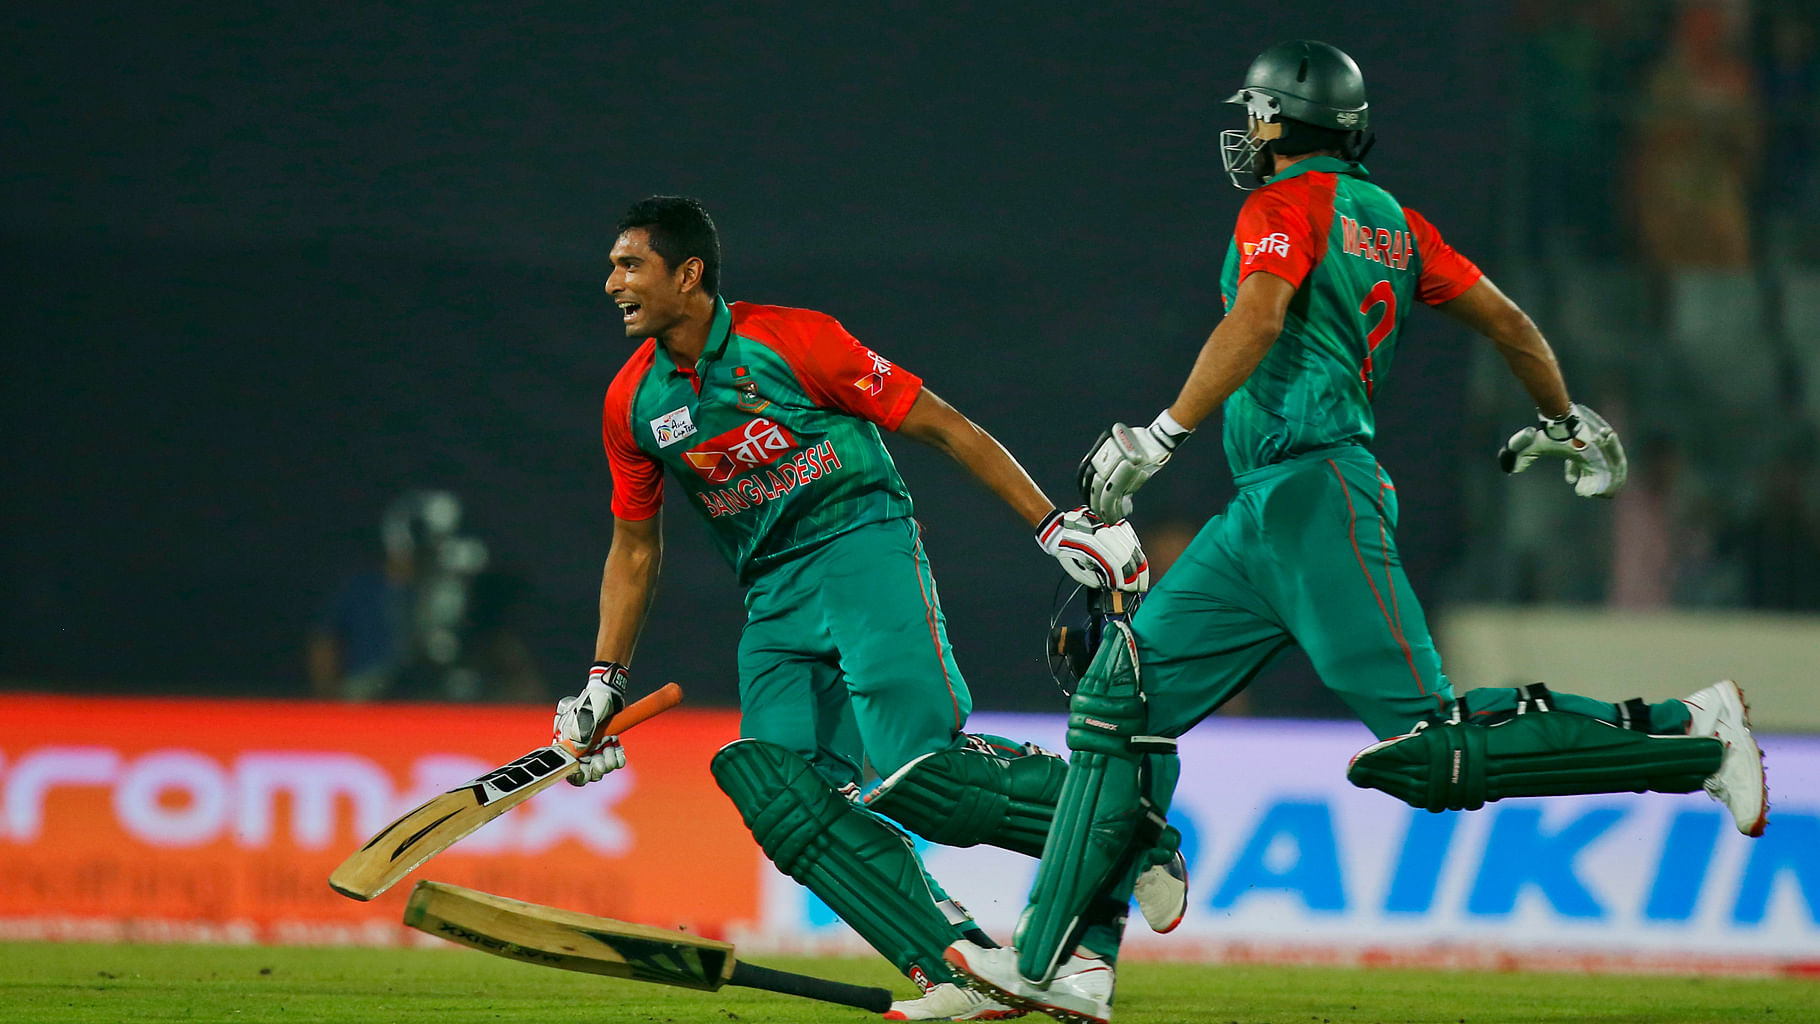 Bangladesh Cricket Board has announced their 15-member squad for the ICC Cricket World Cup.